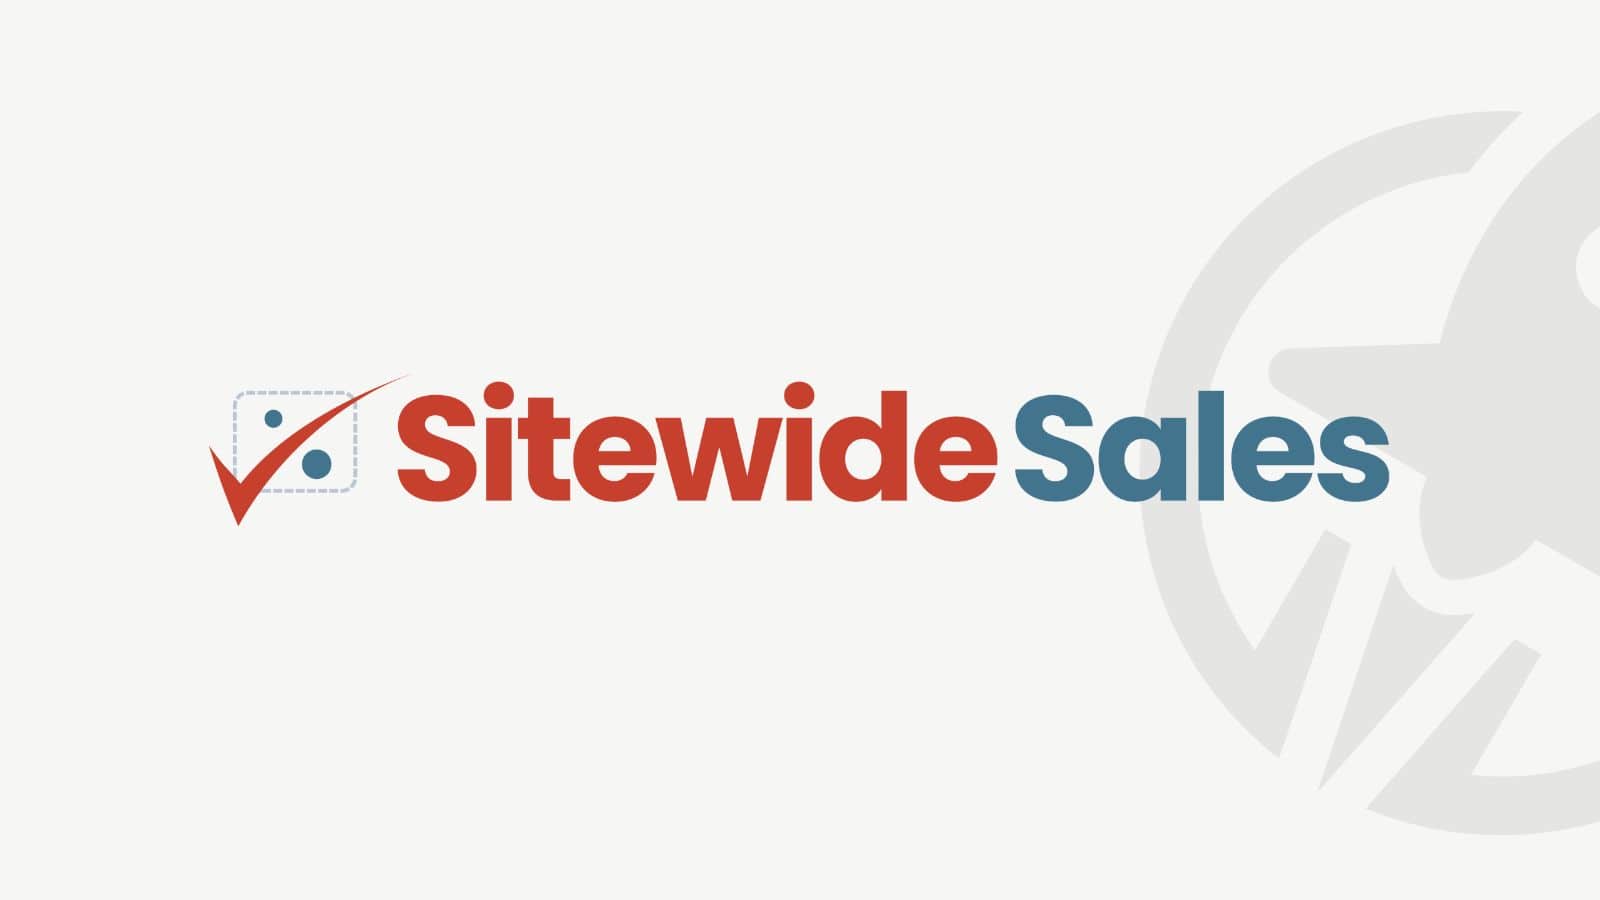 LifterLMS Sitewide Sales promotion image